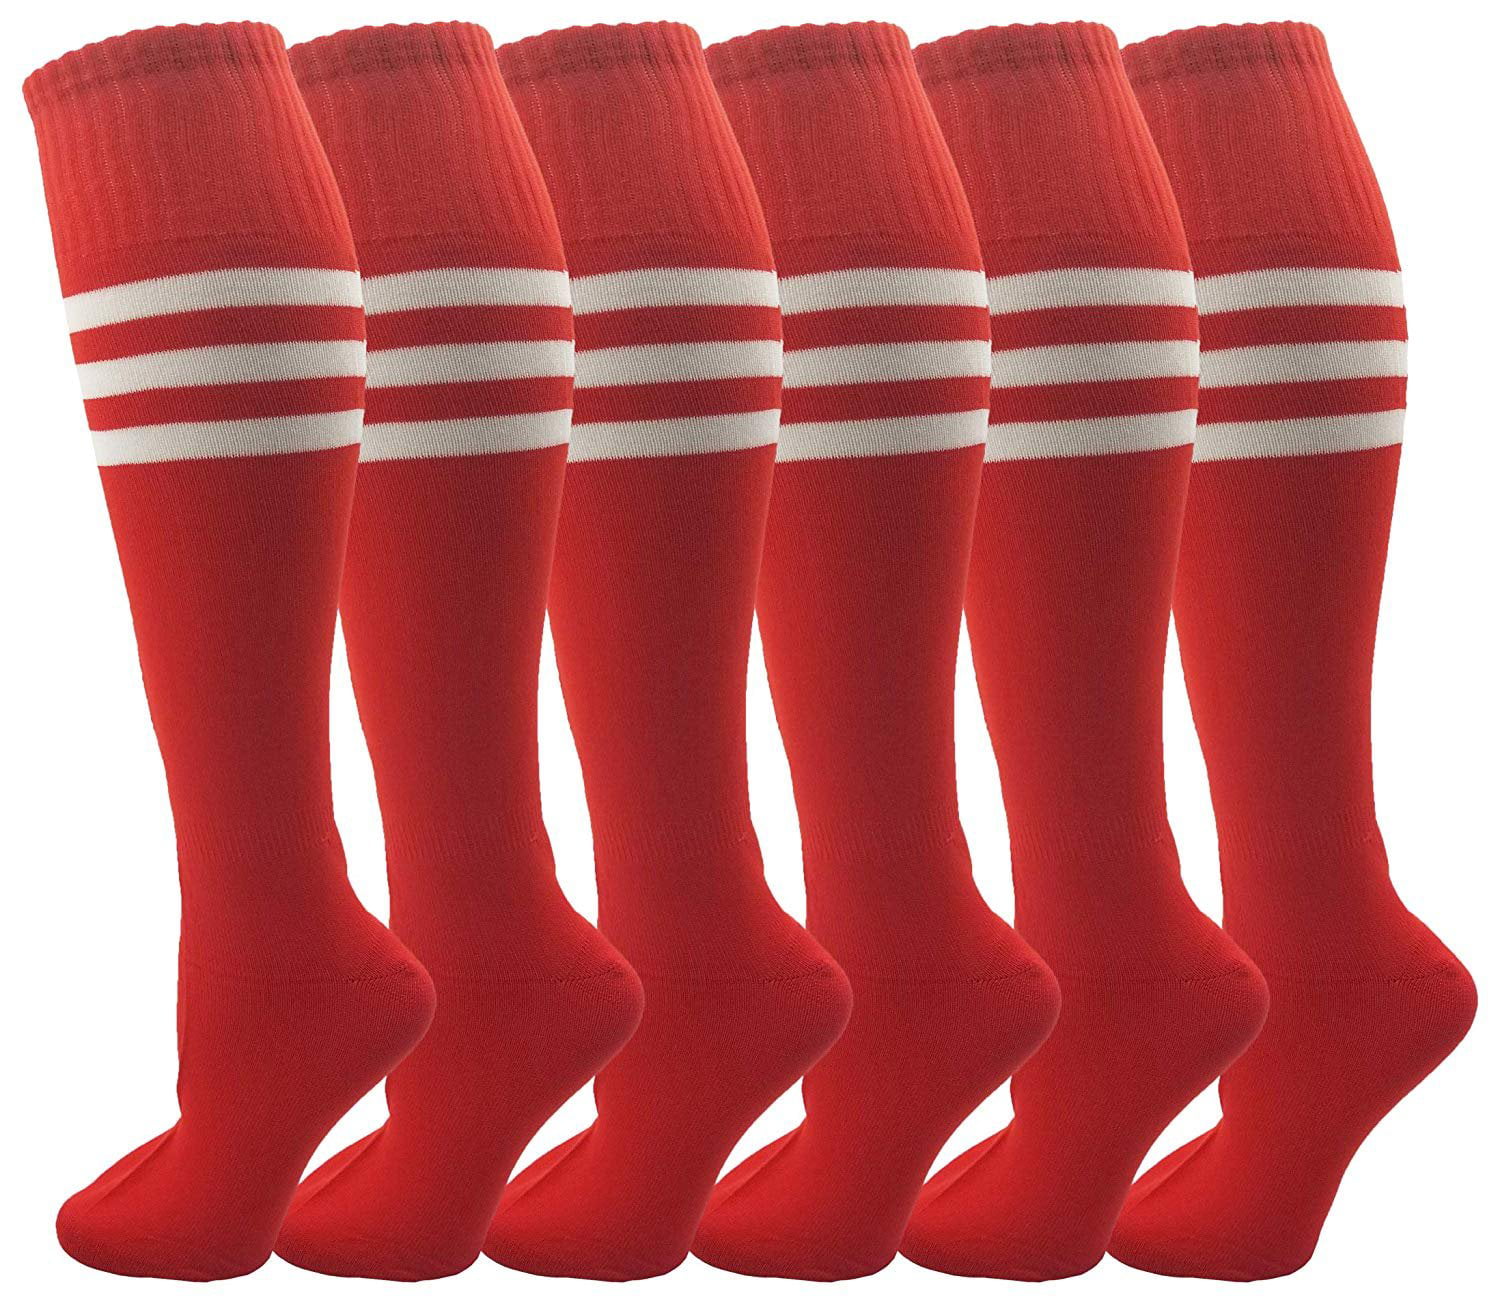 2 Pair Brand New Youth SCORE Athletic Sports Soccer Socks Red White  6-8.5 NWT! 